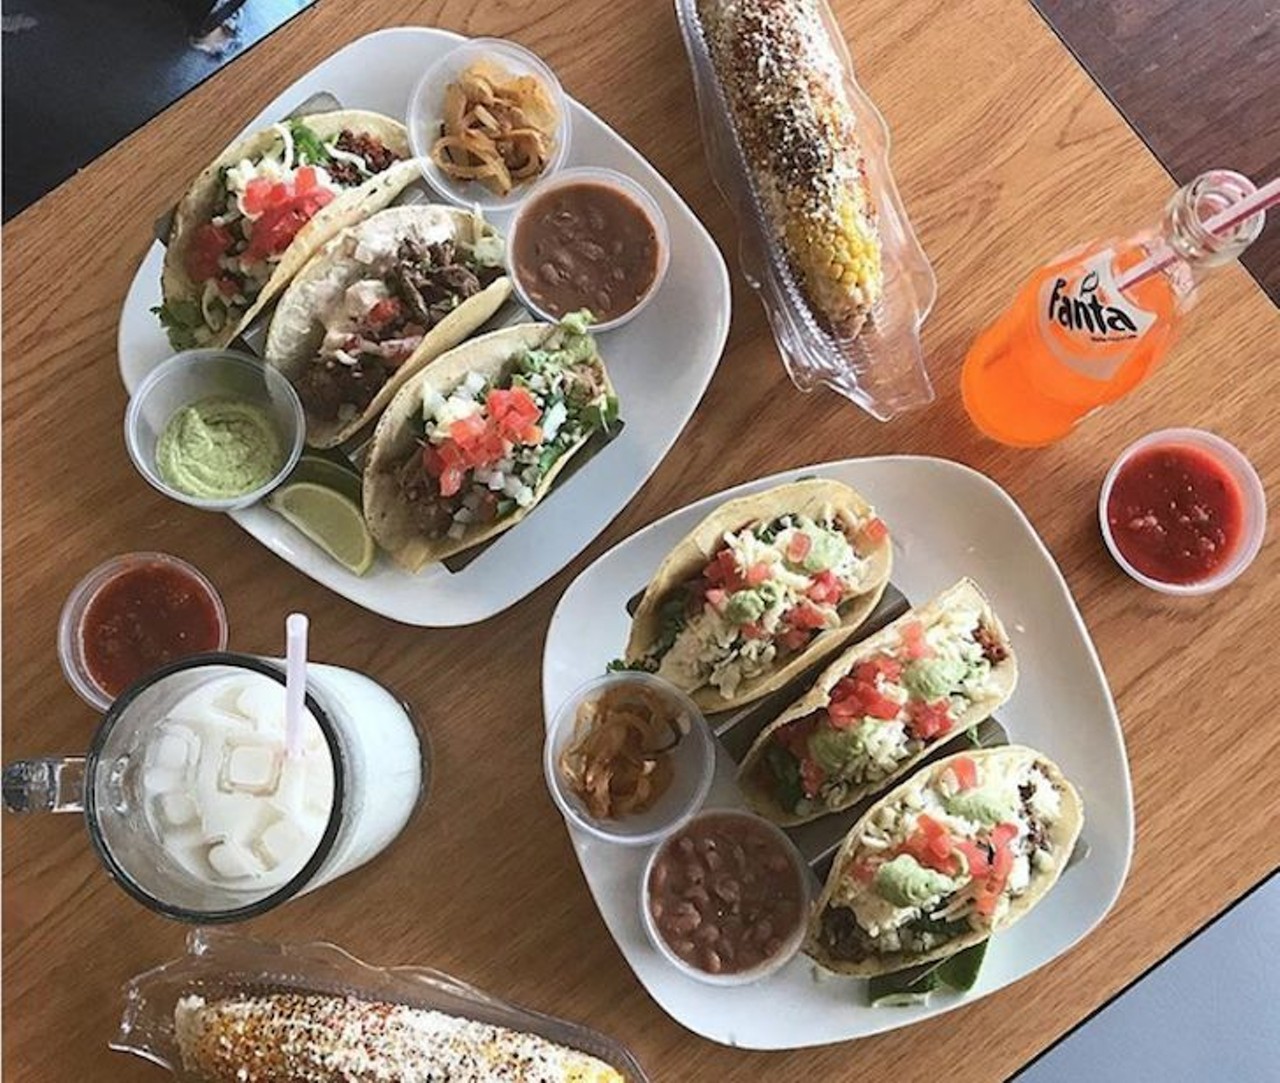 Taqueria El Gordo 
830 Laura St., Casselberry, 321-295-7351
This family-run establishment serves up tasty elote, authentic mole and fresh tacos. Balance out the savory bites with arroz con dulce or lime custard for dessert.
Photo via orlandoeats/Instagram